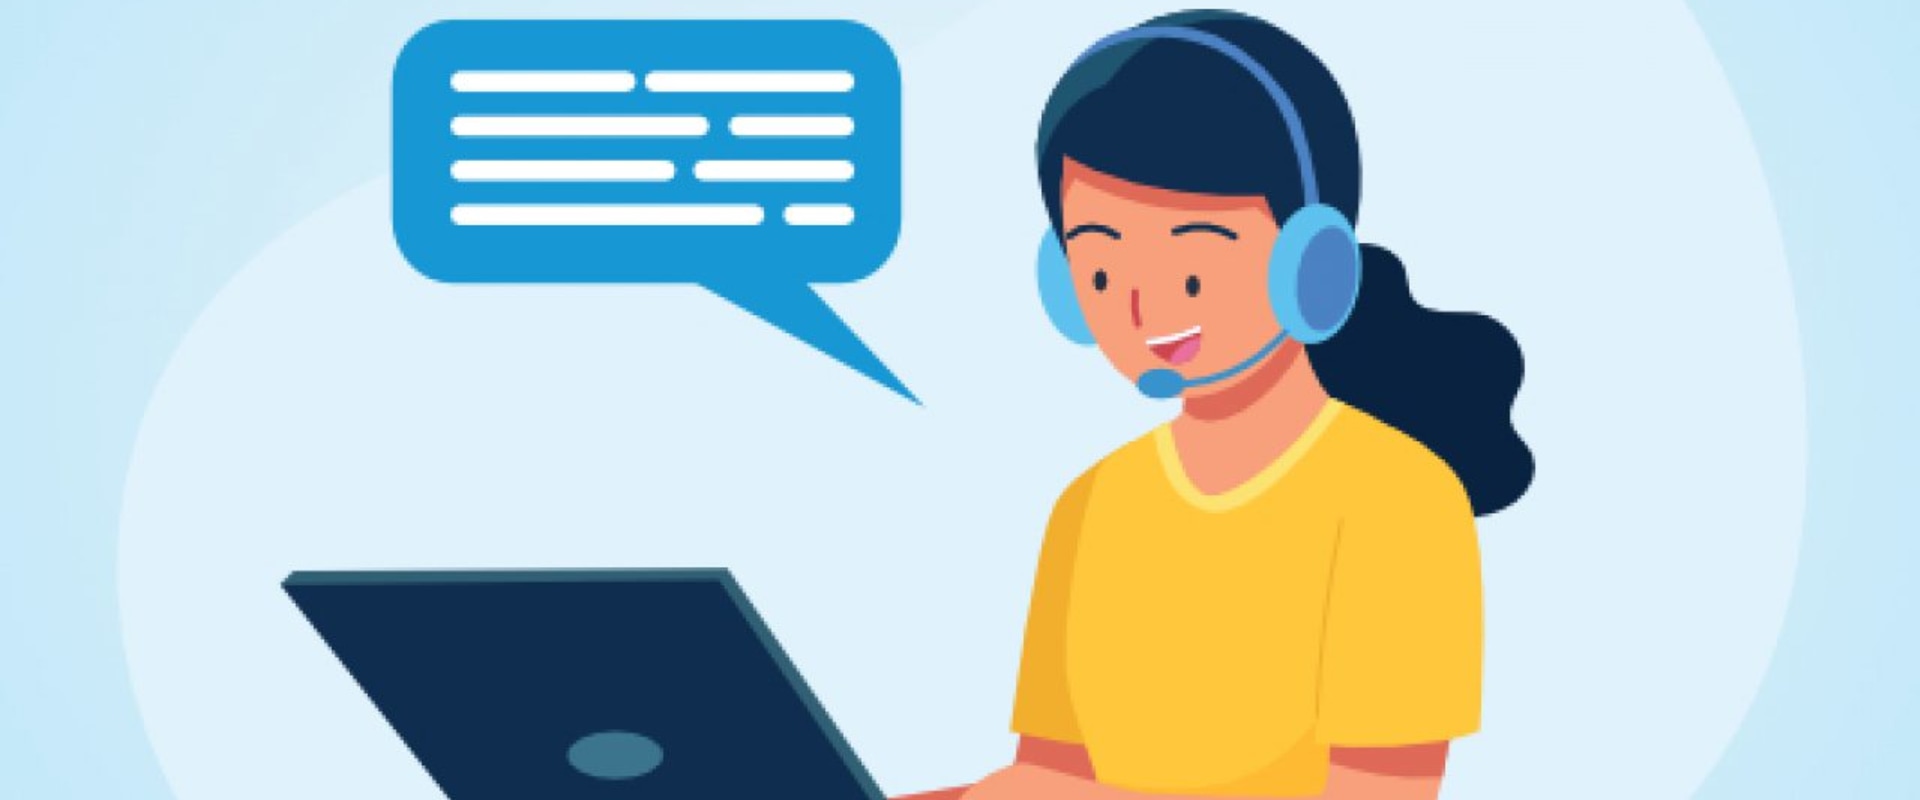 Live chat and messaging tools: Enhancing customer service and support